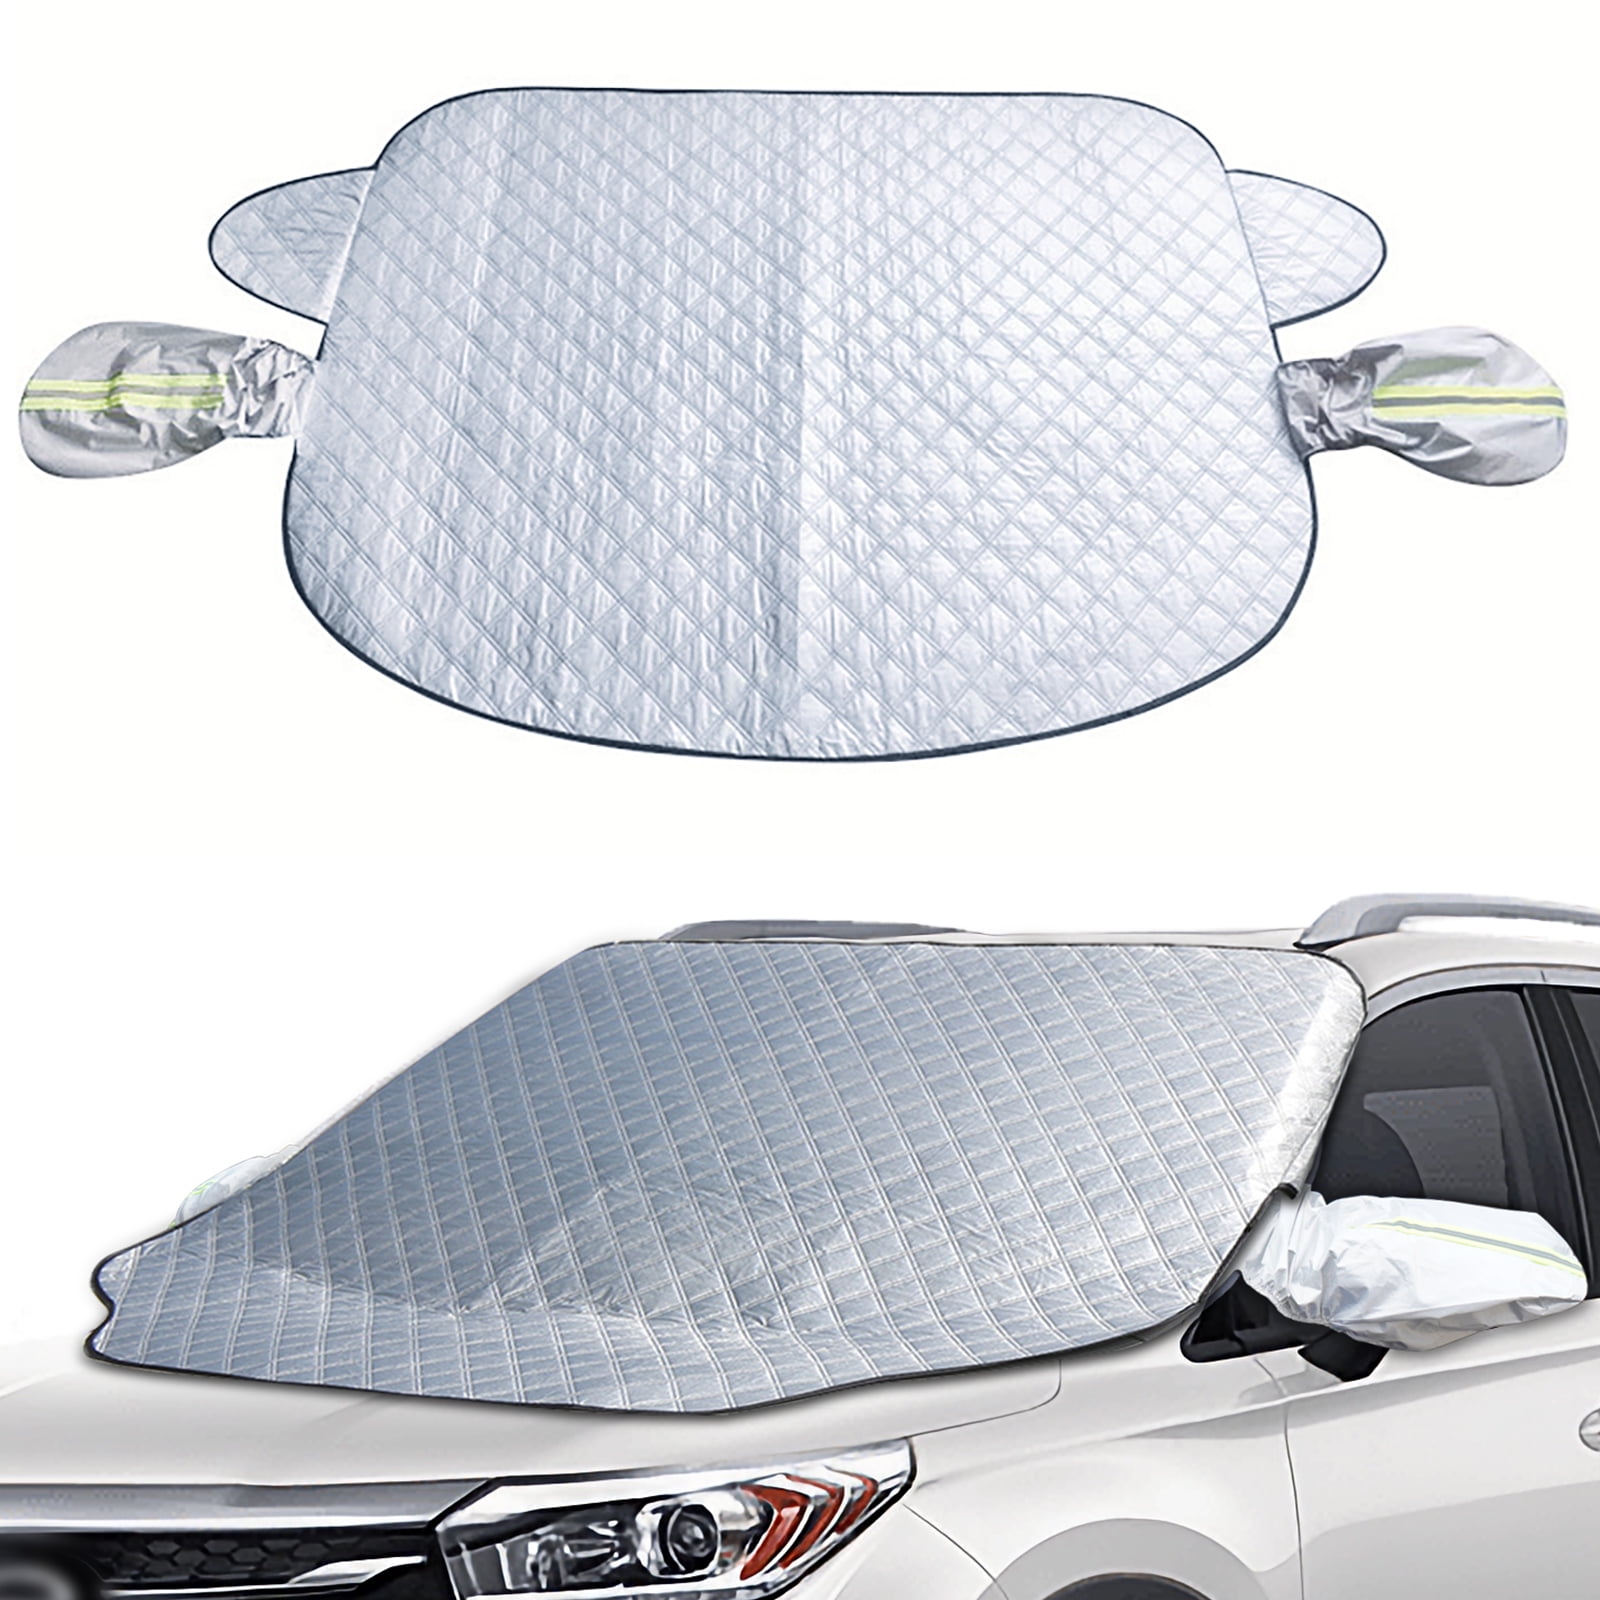  SnowOFF Extra Large Windshield Snow Ice Cover - Fit Any Car SUV  Truck Van - Windproof Straps, Wings, Suction Cups, Magnets - Plus Demist  Cloth + Blanket - Winter Outdoor Frost